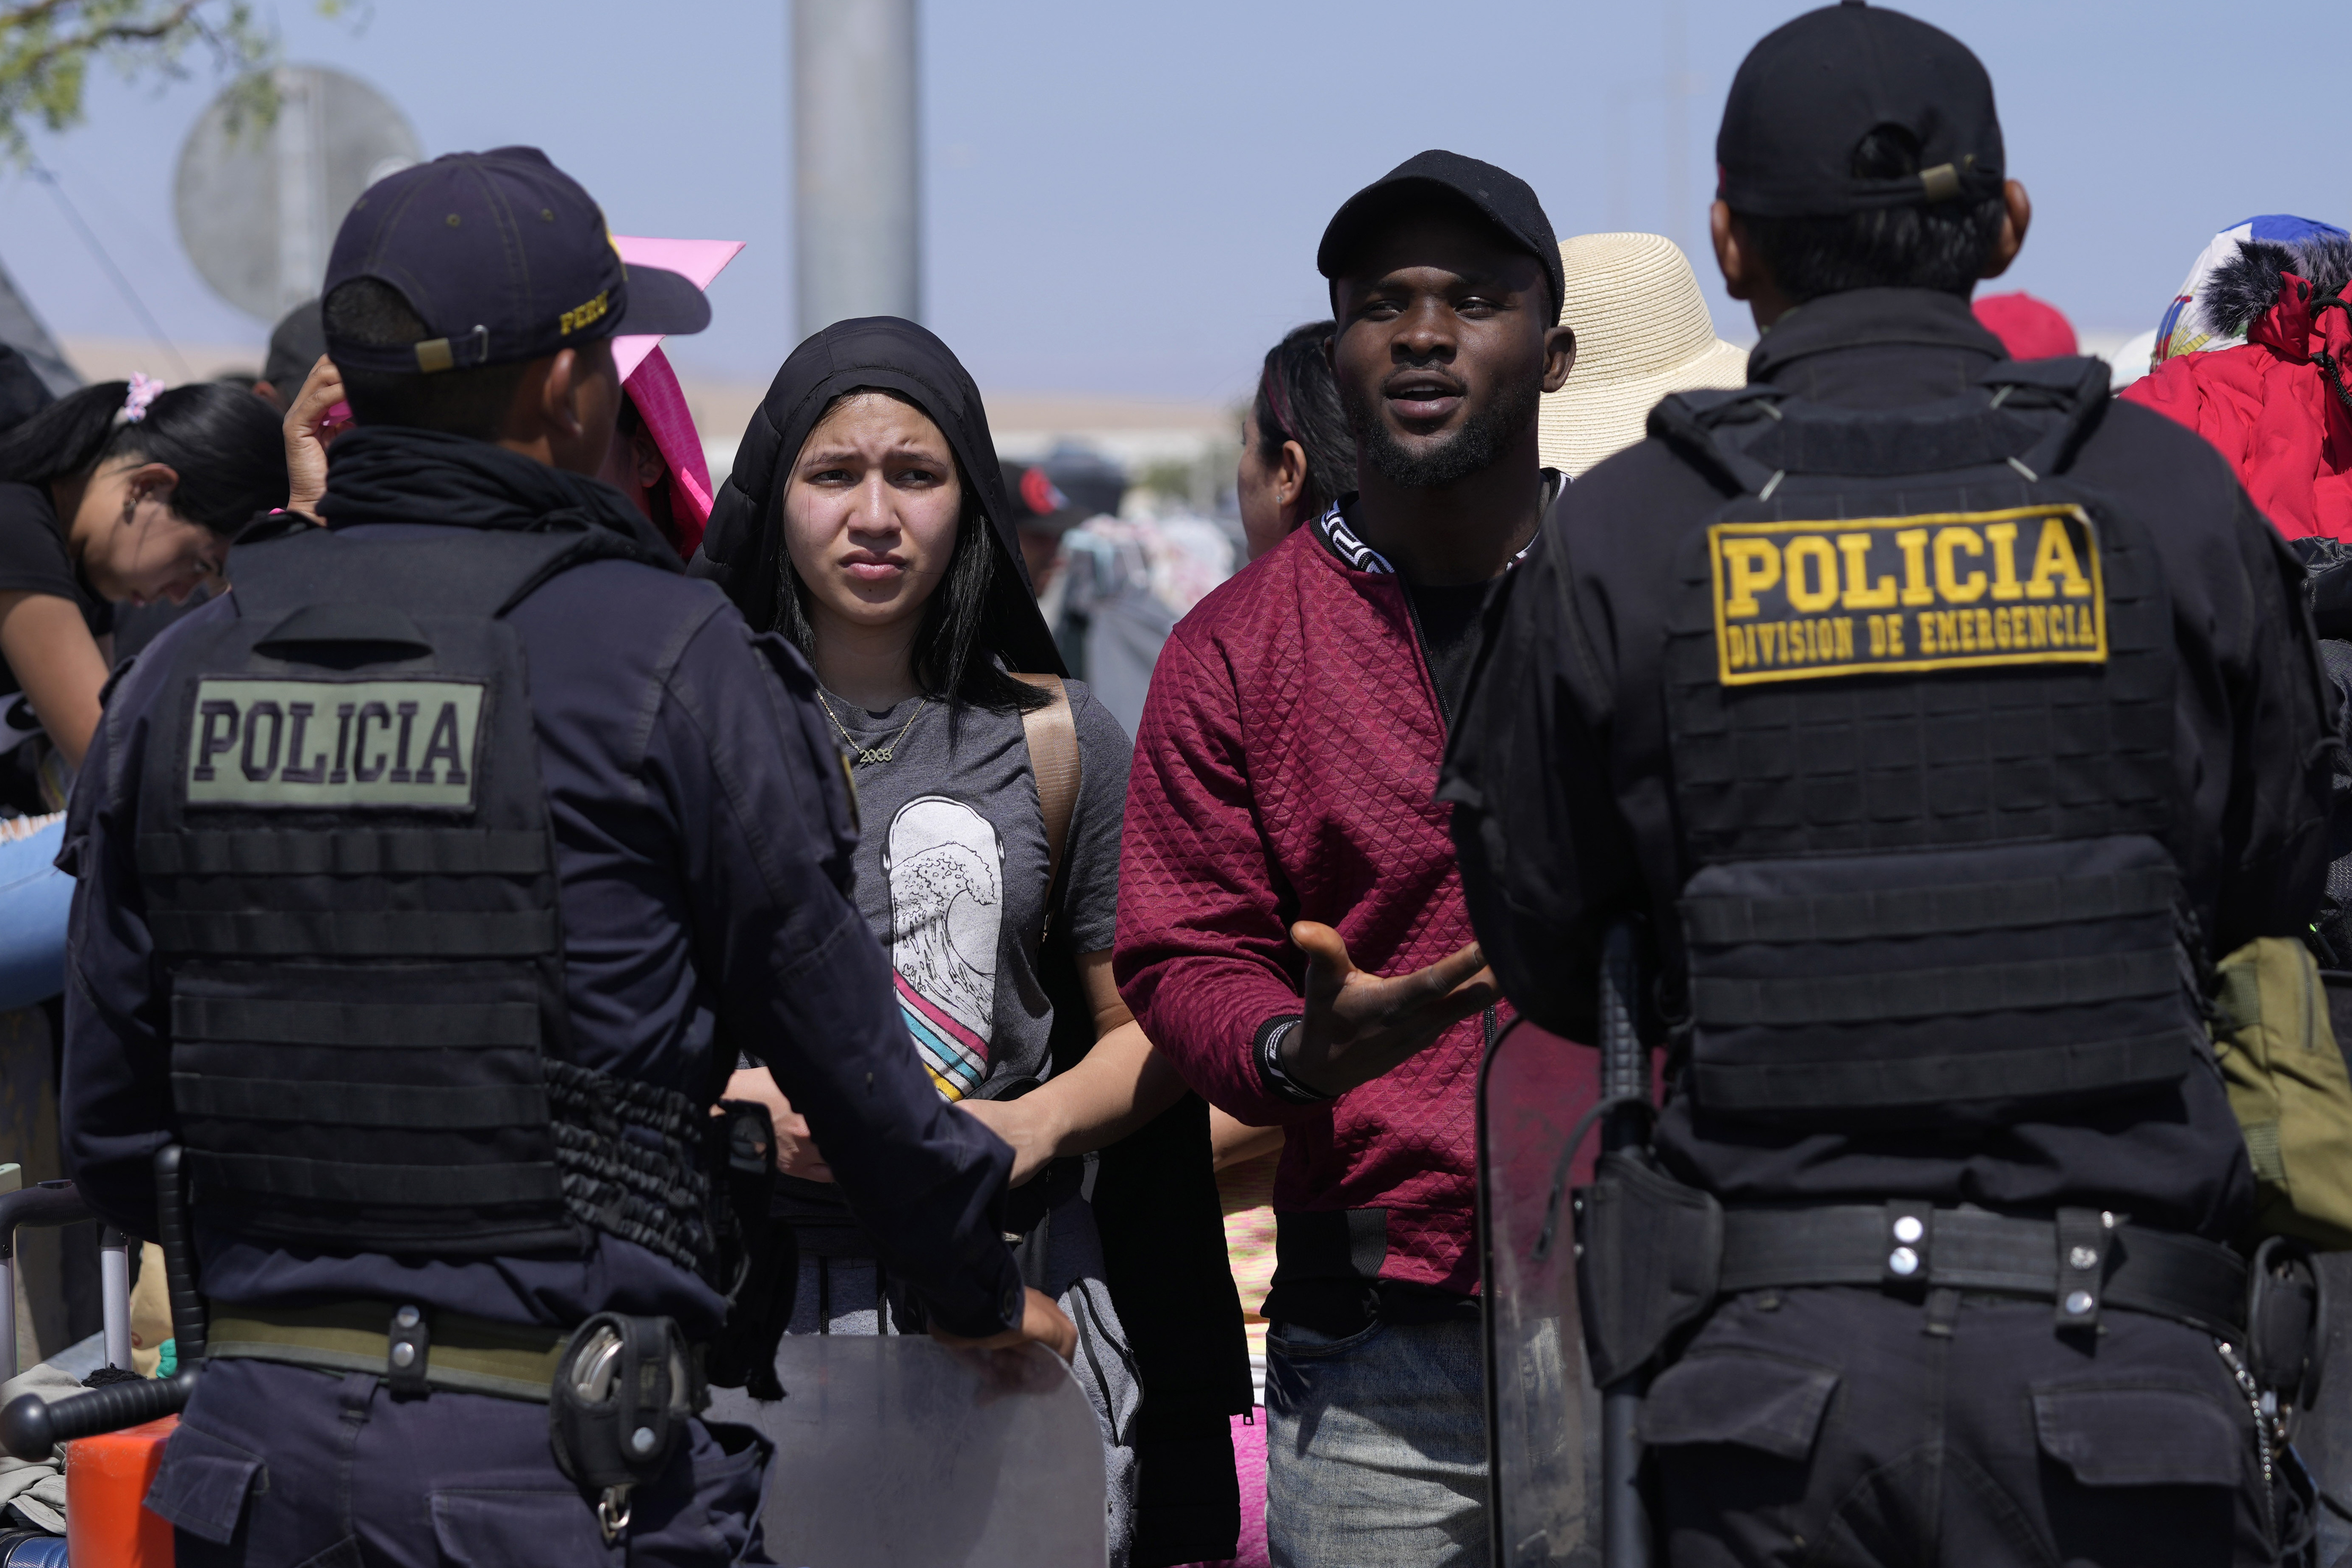 Venezuelan migrants talk with Peruvian police officers guarding the border with Chile, in Tacna, Peru, Friday, April 28, 2023. The migration crisis on the Chile-Peru border intensified on Thursday with hundreds of migrants left stranded. at the border limit, without being able to cross into Peru.  (AP Photo/Martín Mejía)